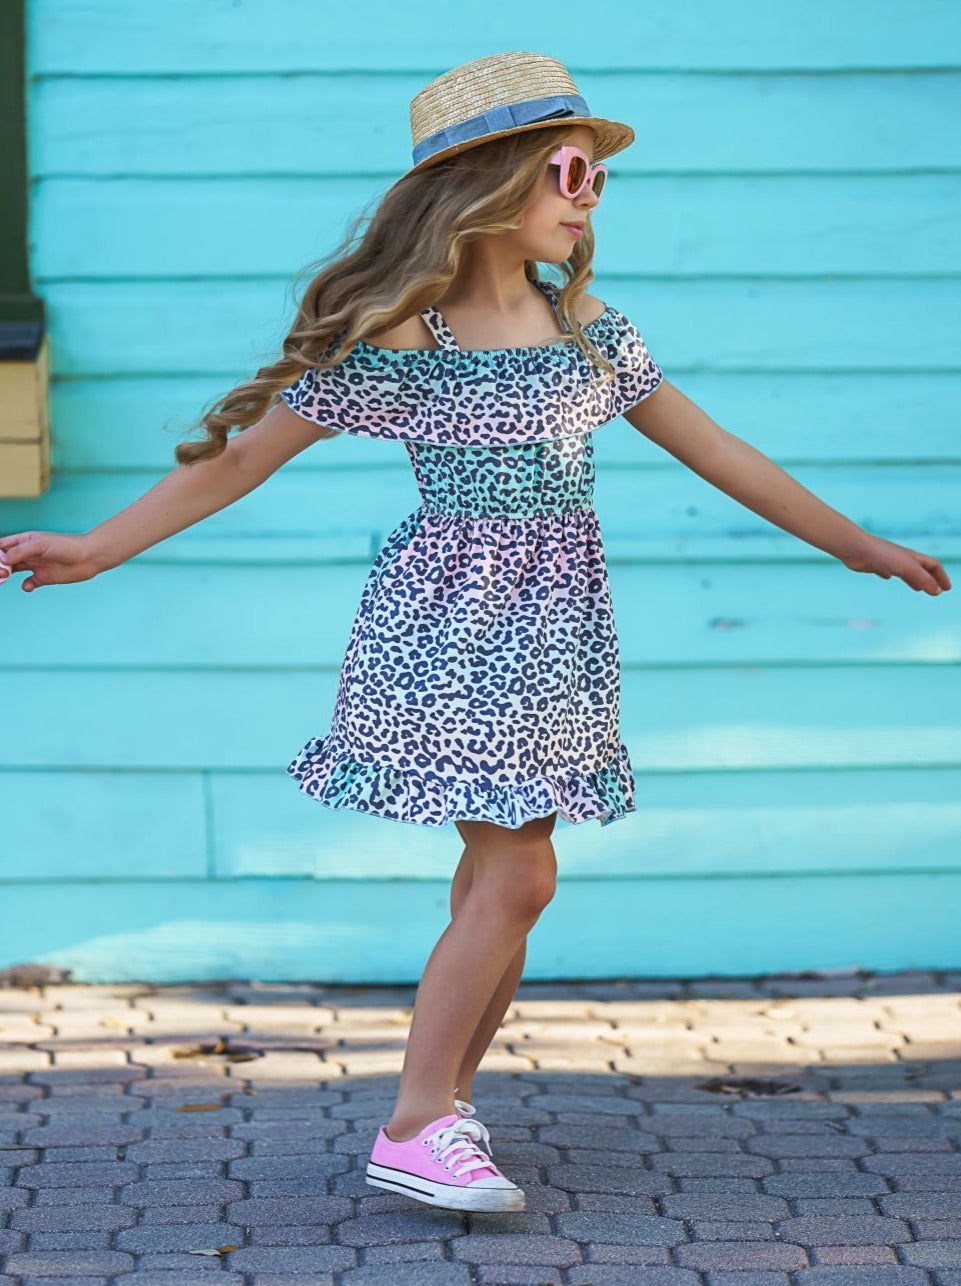 Girls dress features a cold-shoulder 360-degree ruffle bib, cinched waist, ruffle hem, and pastel ombre leopard print pattern